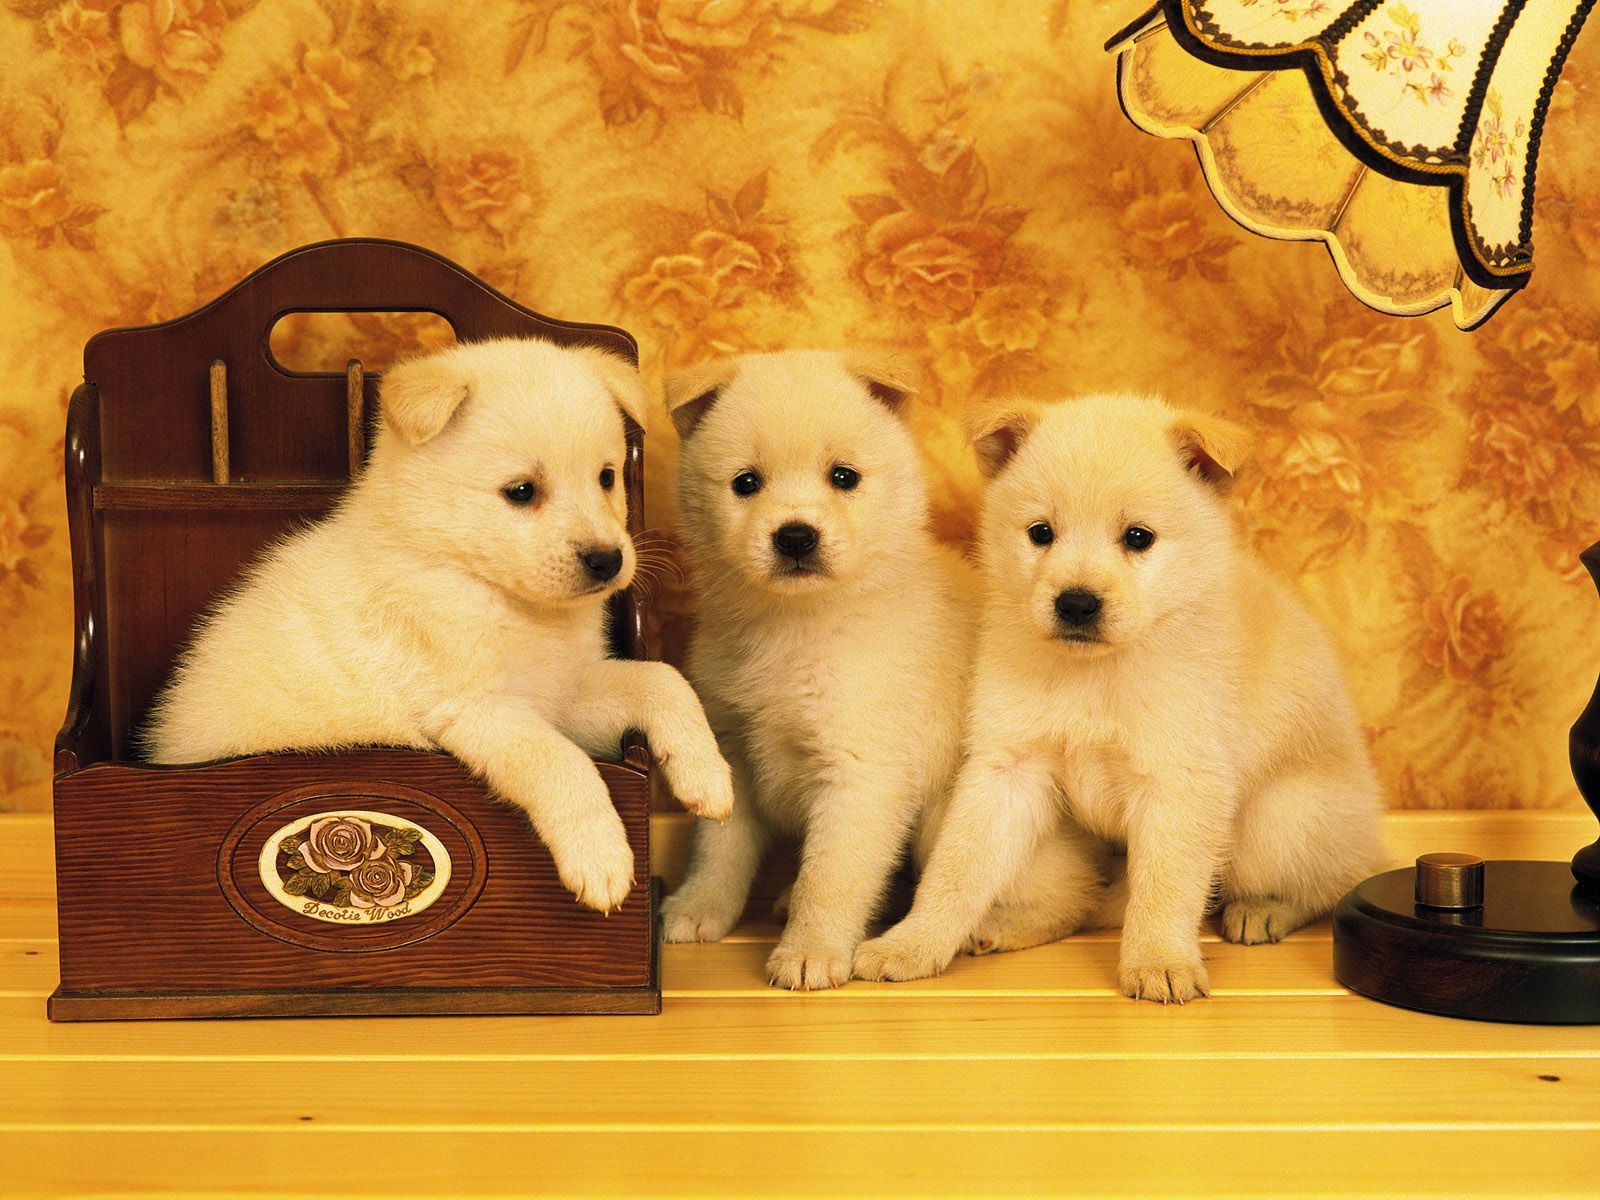 Pictures Of Pets - Wall Paper Pet Animals - 1600x1200 Wallpaper 